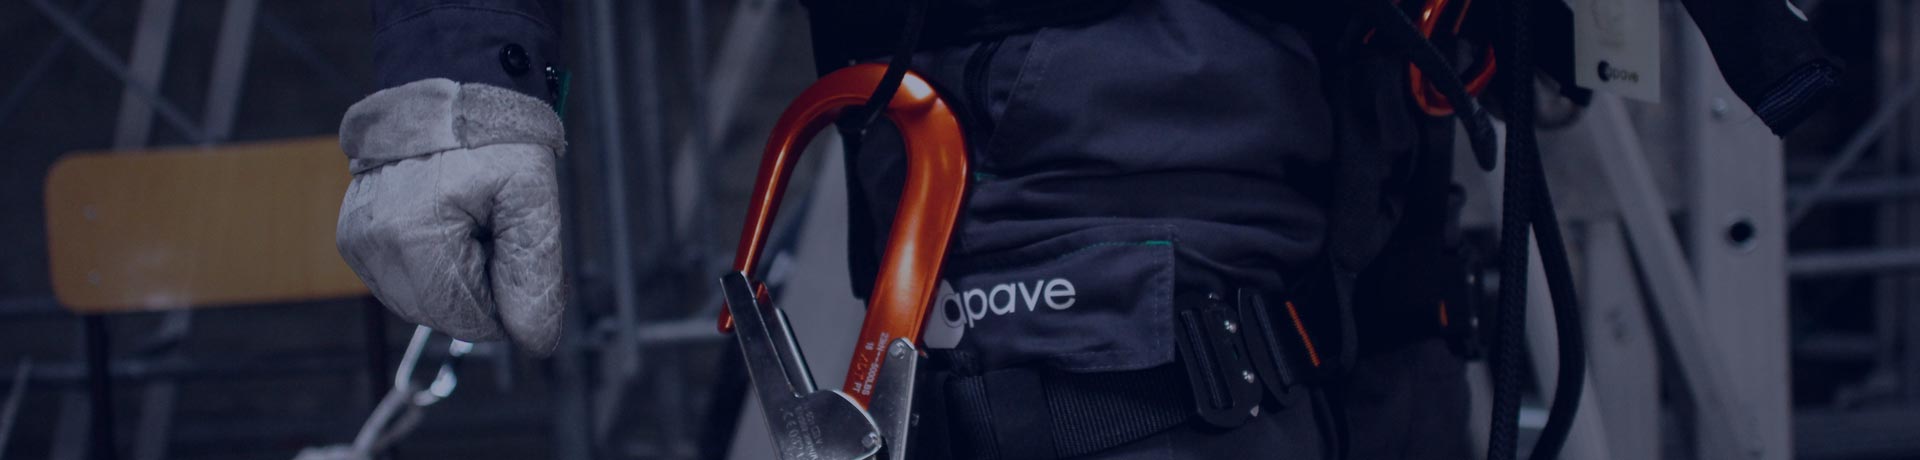 Apave engineer in safety clothing